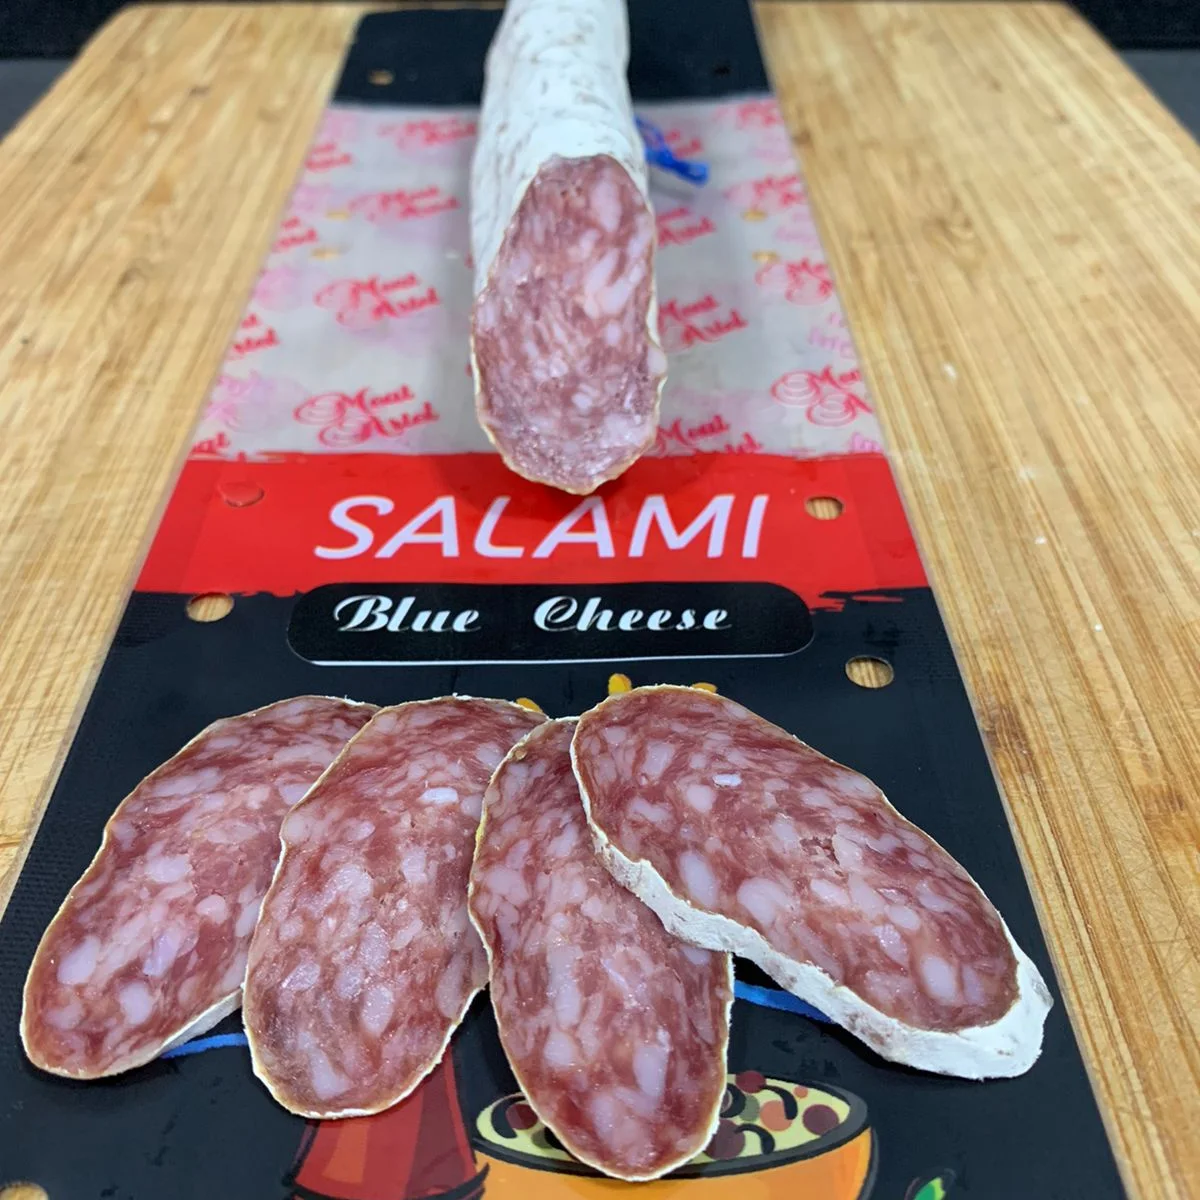 Salami Blue Cheese Salame Blue Cheese pork cured sausage with natural cheese with blue mold